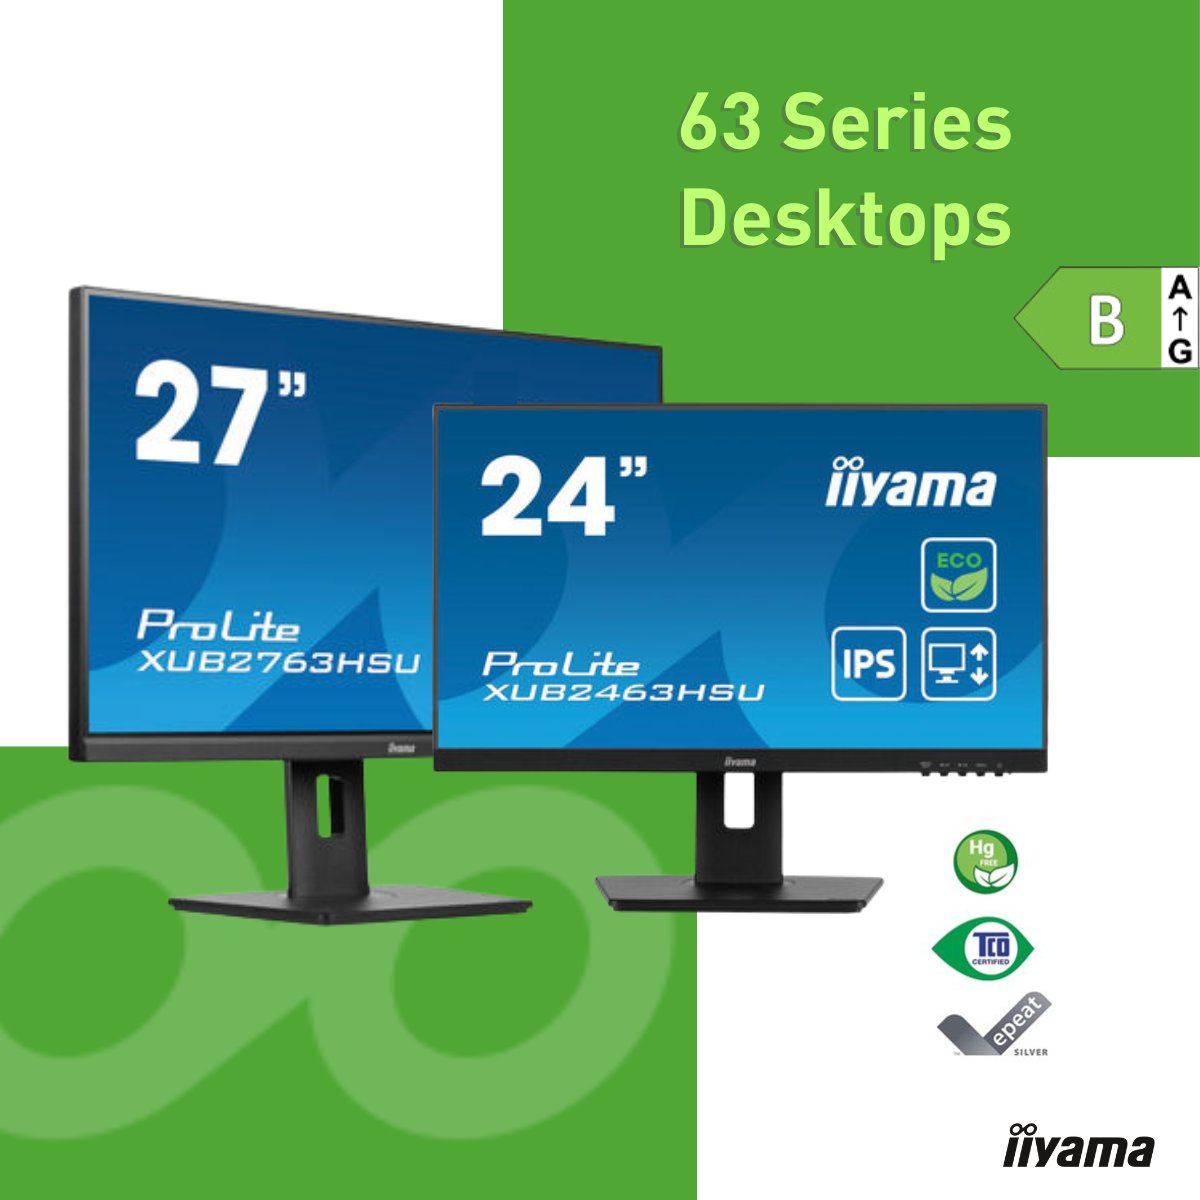 Elevate your workspace #withiiyama 63 Series Desktops. From zero plastic packaging to 85% recycled materials, this monitor champions #sustainability. TCO Certified, EPEAT® Silver, and Eye Safe, it's not just a monitor, it's your green choice!